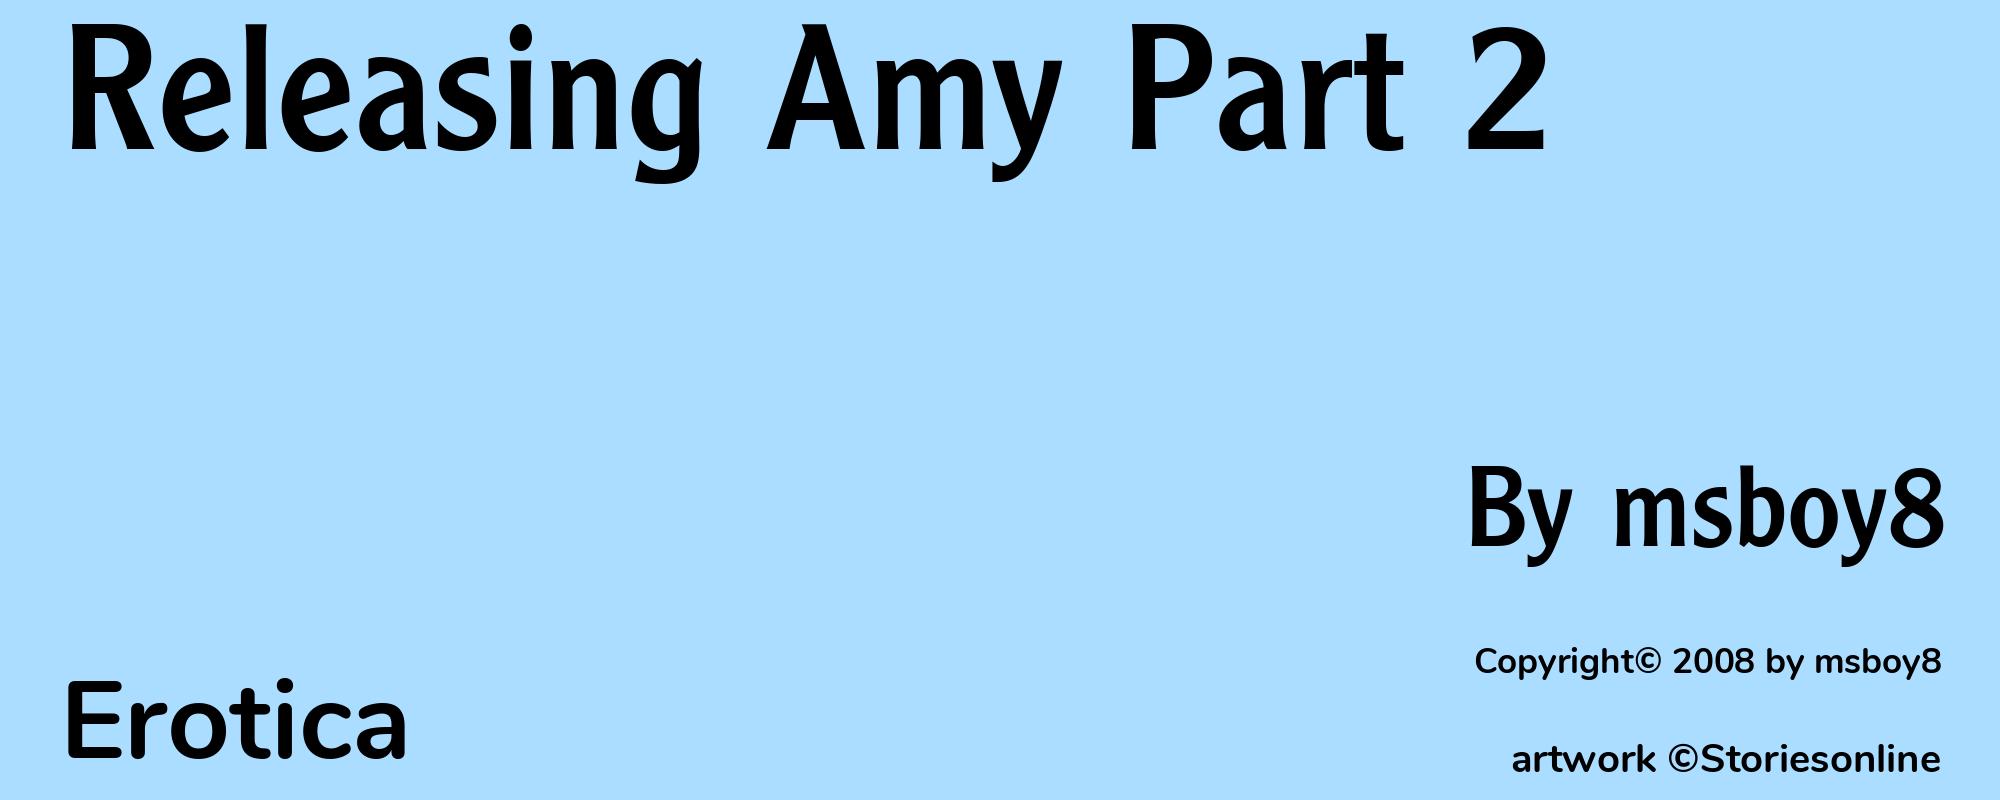 Releasing Amy Part 2 - Cover